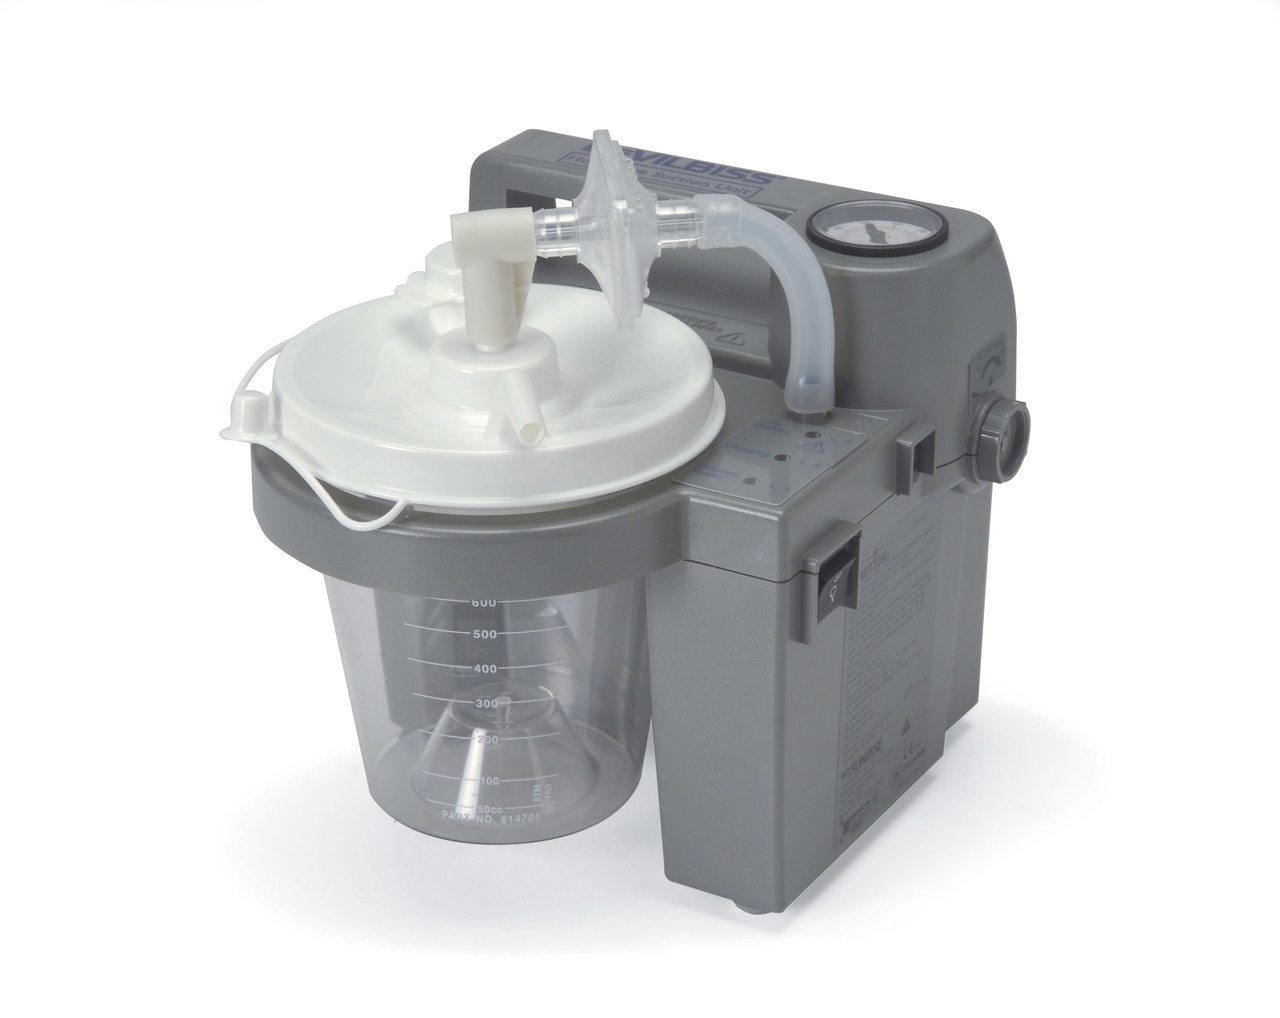 DeVilbiss Vacu-Aide Suction Unit with External Filter